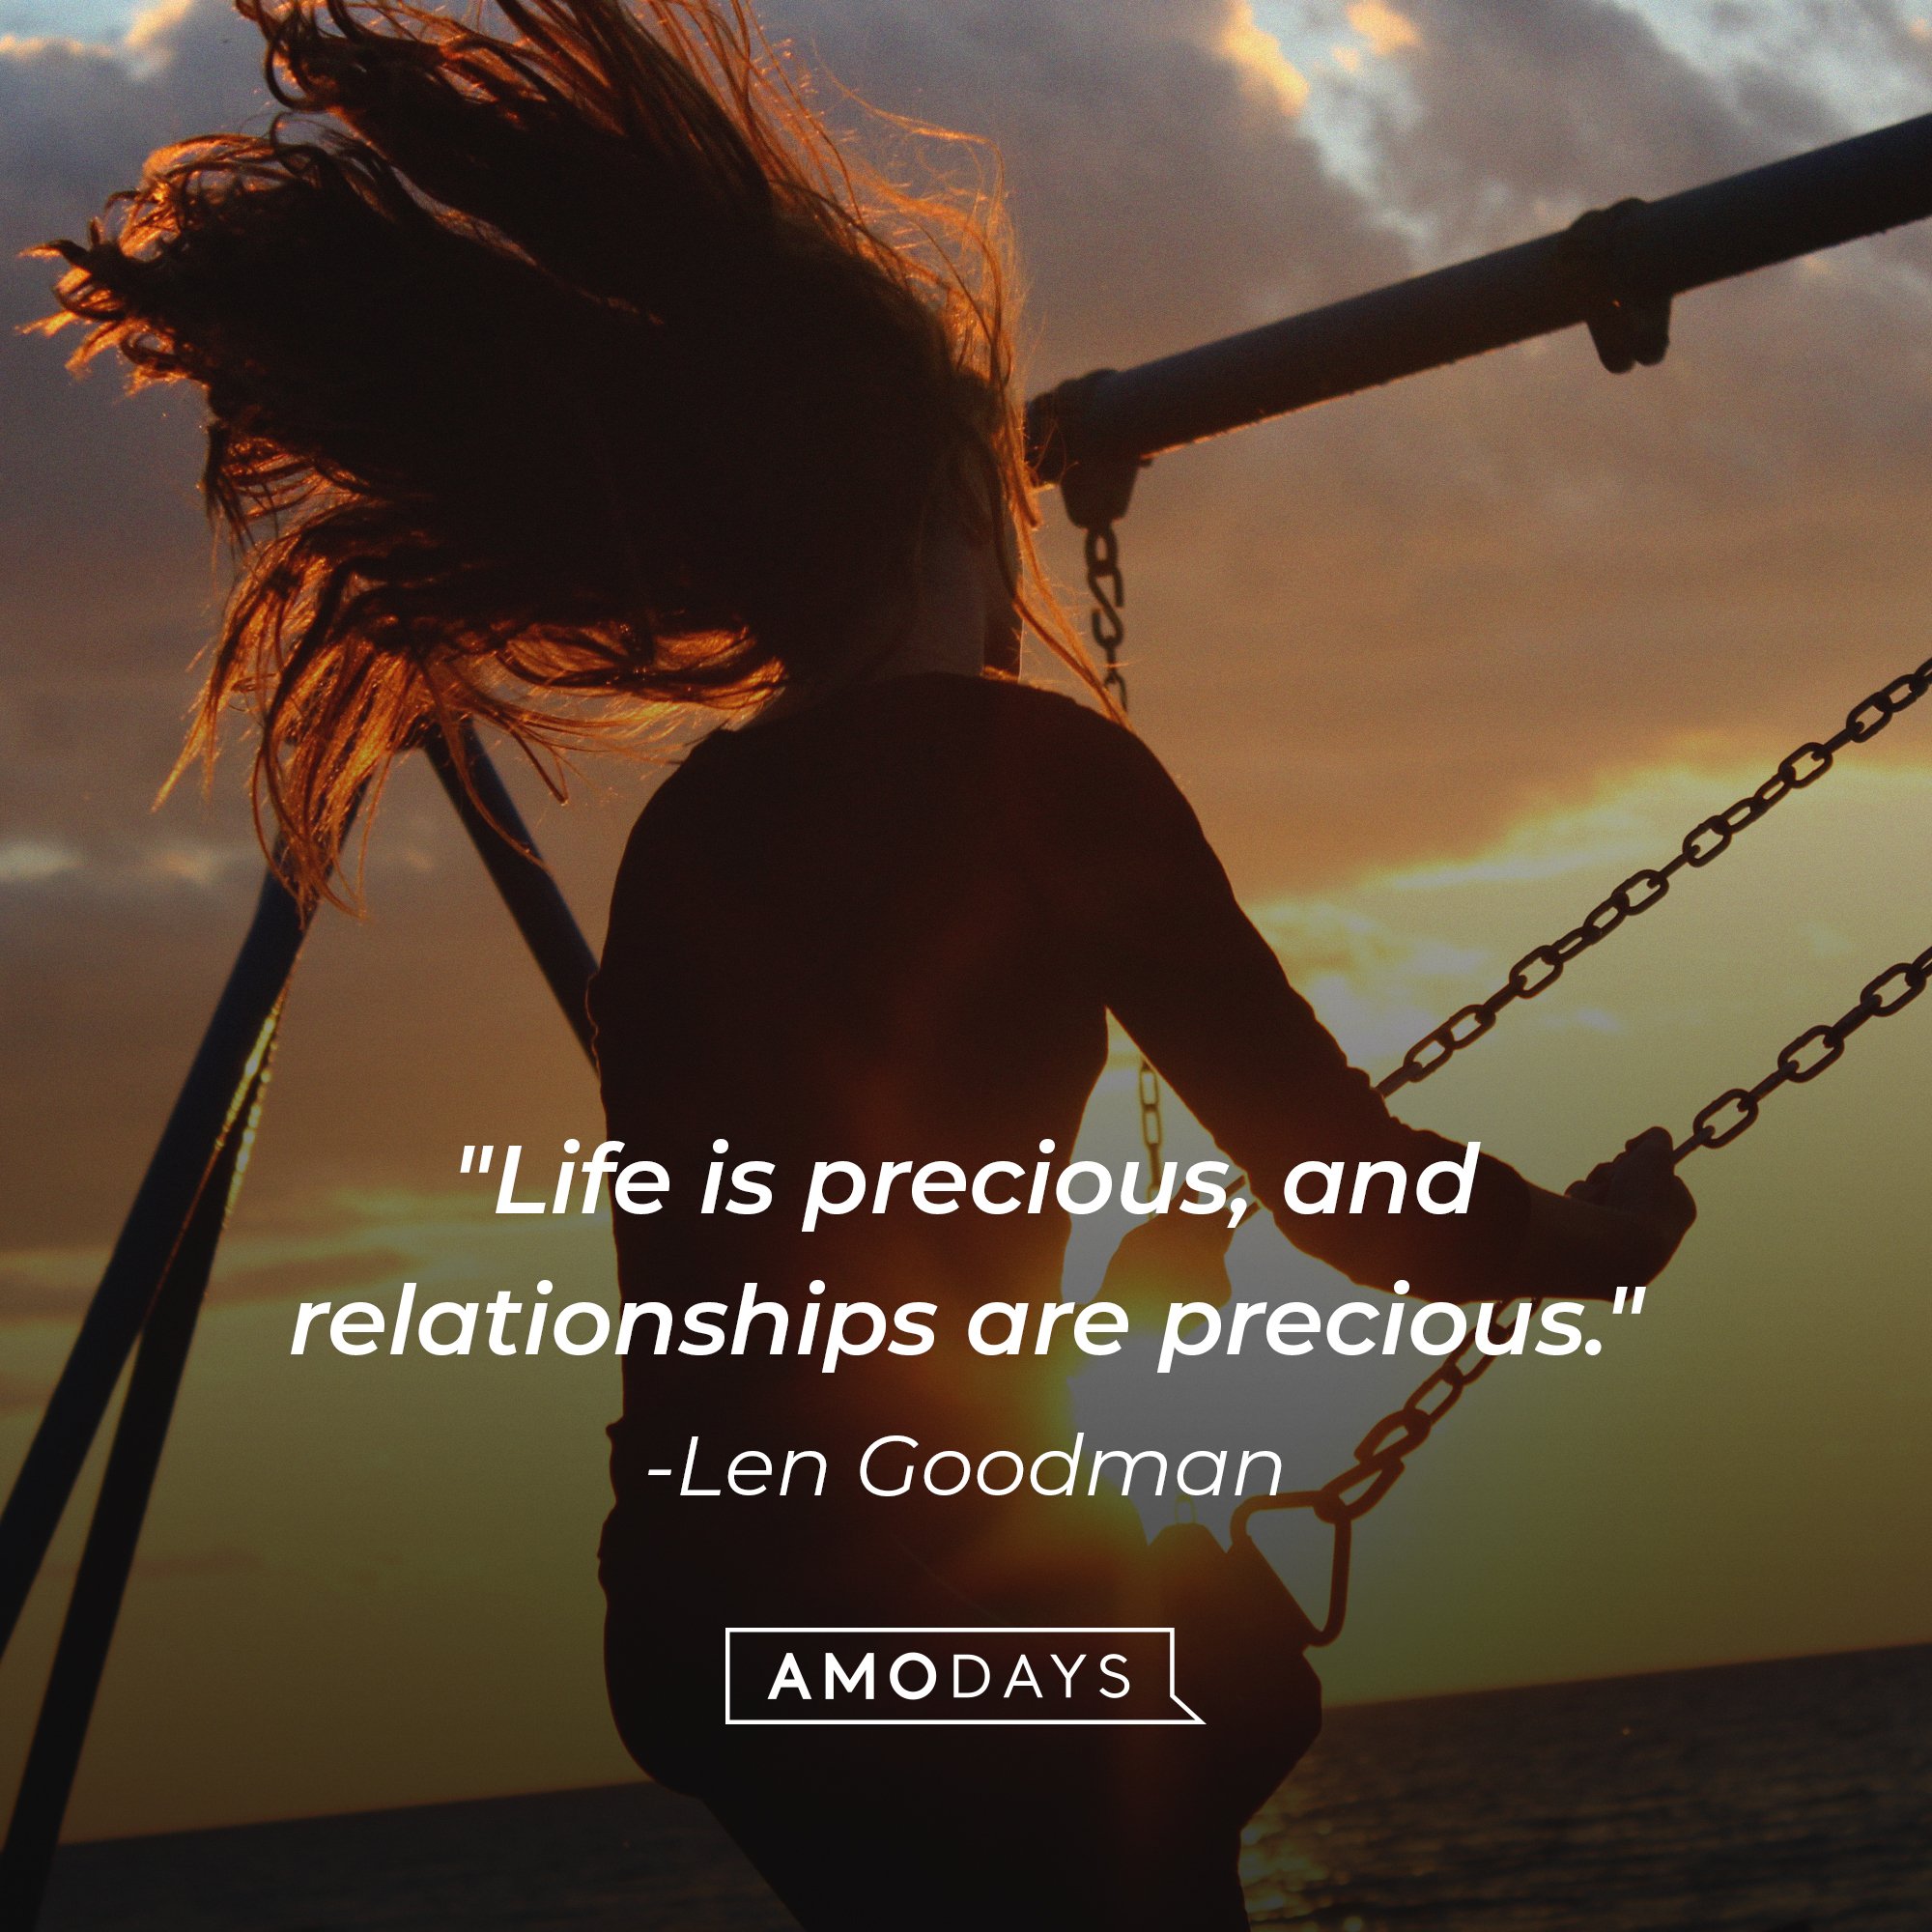  Len Goodman’s quote: "Life is precious, and relationships are precious." | Image: AmoDays